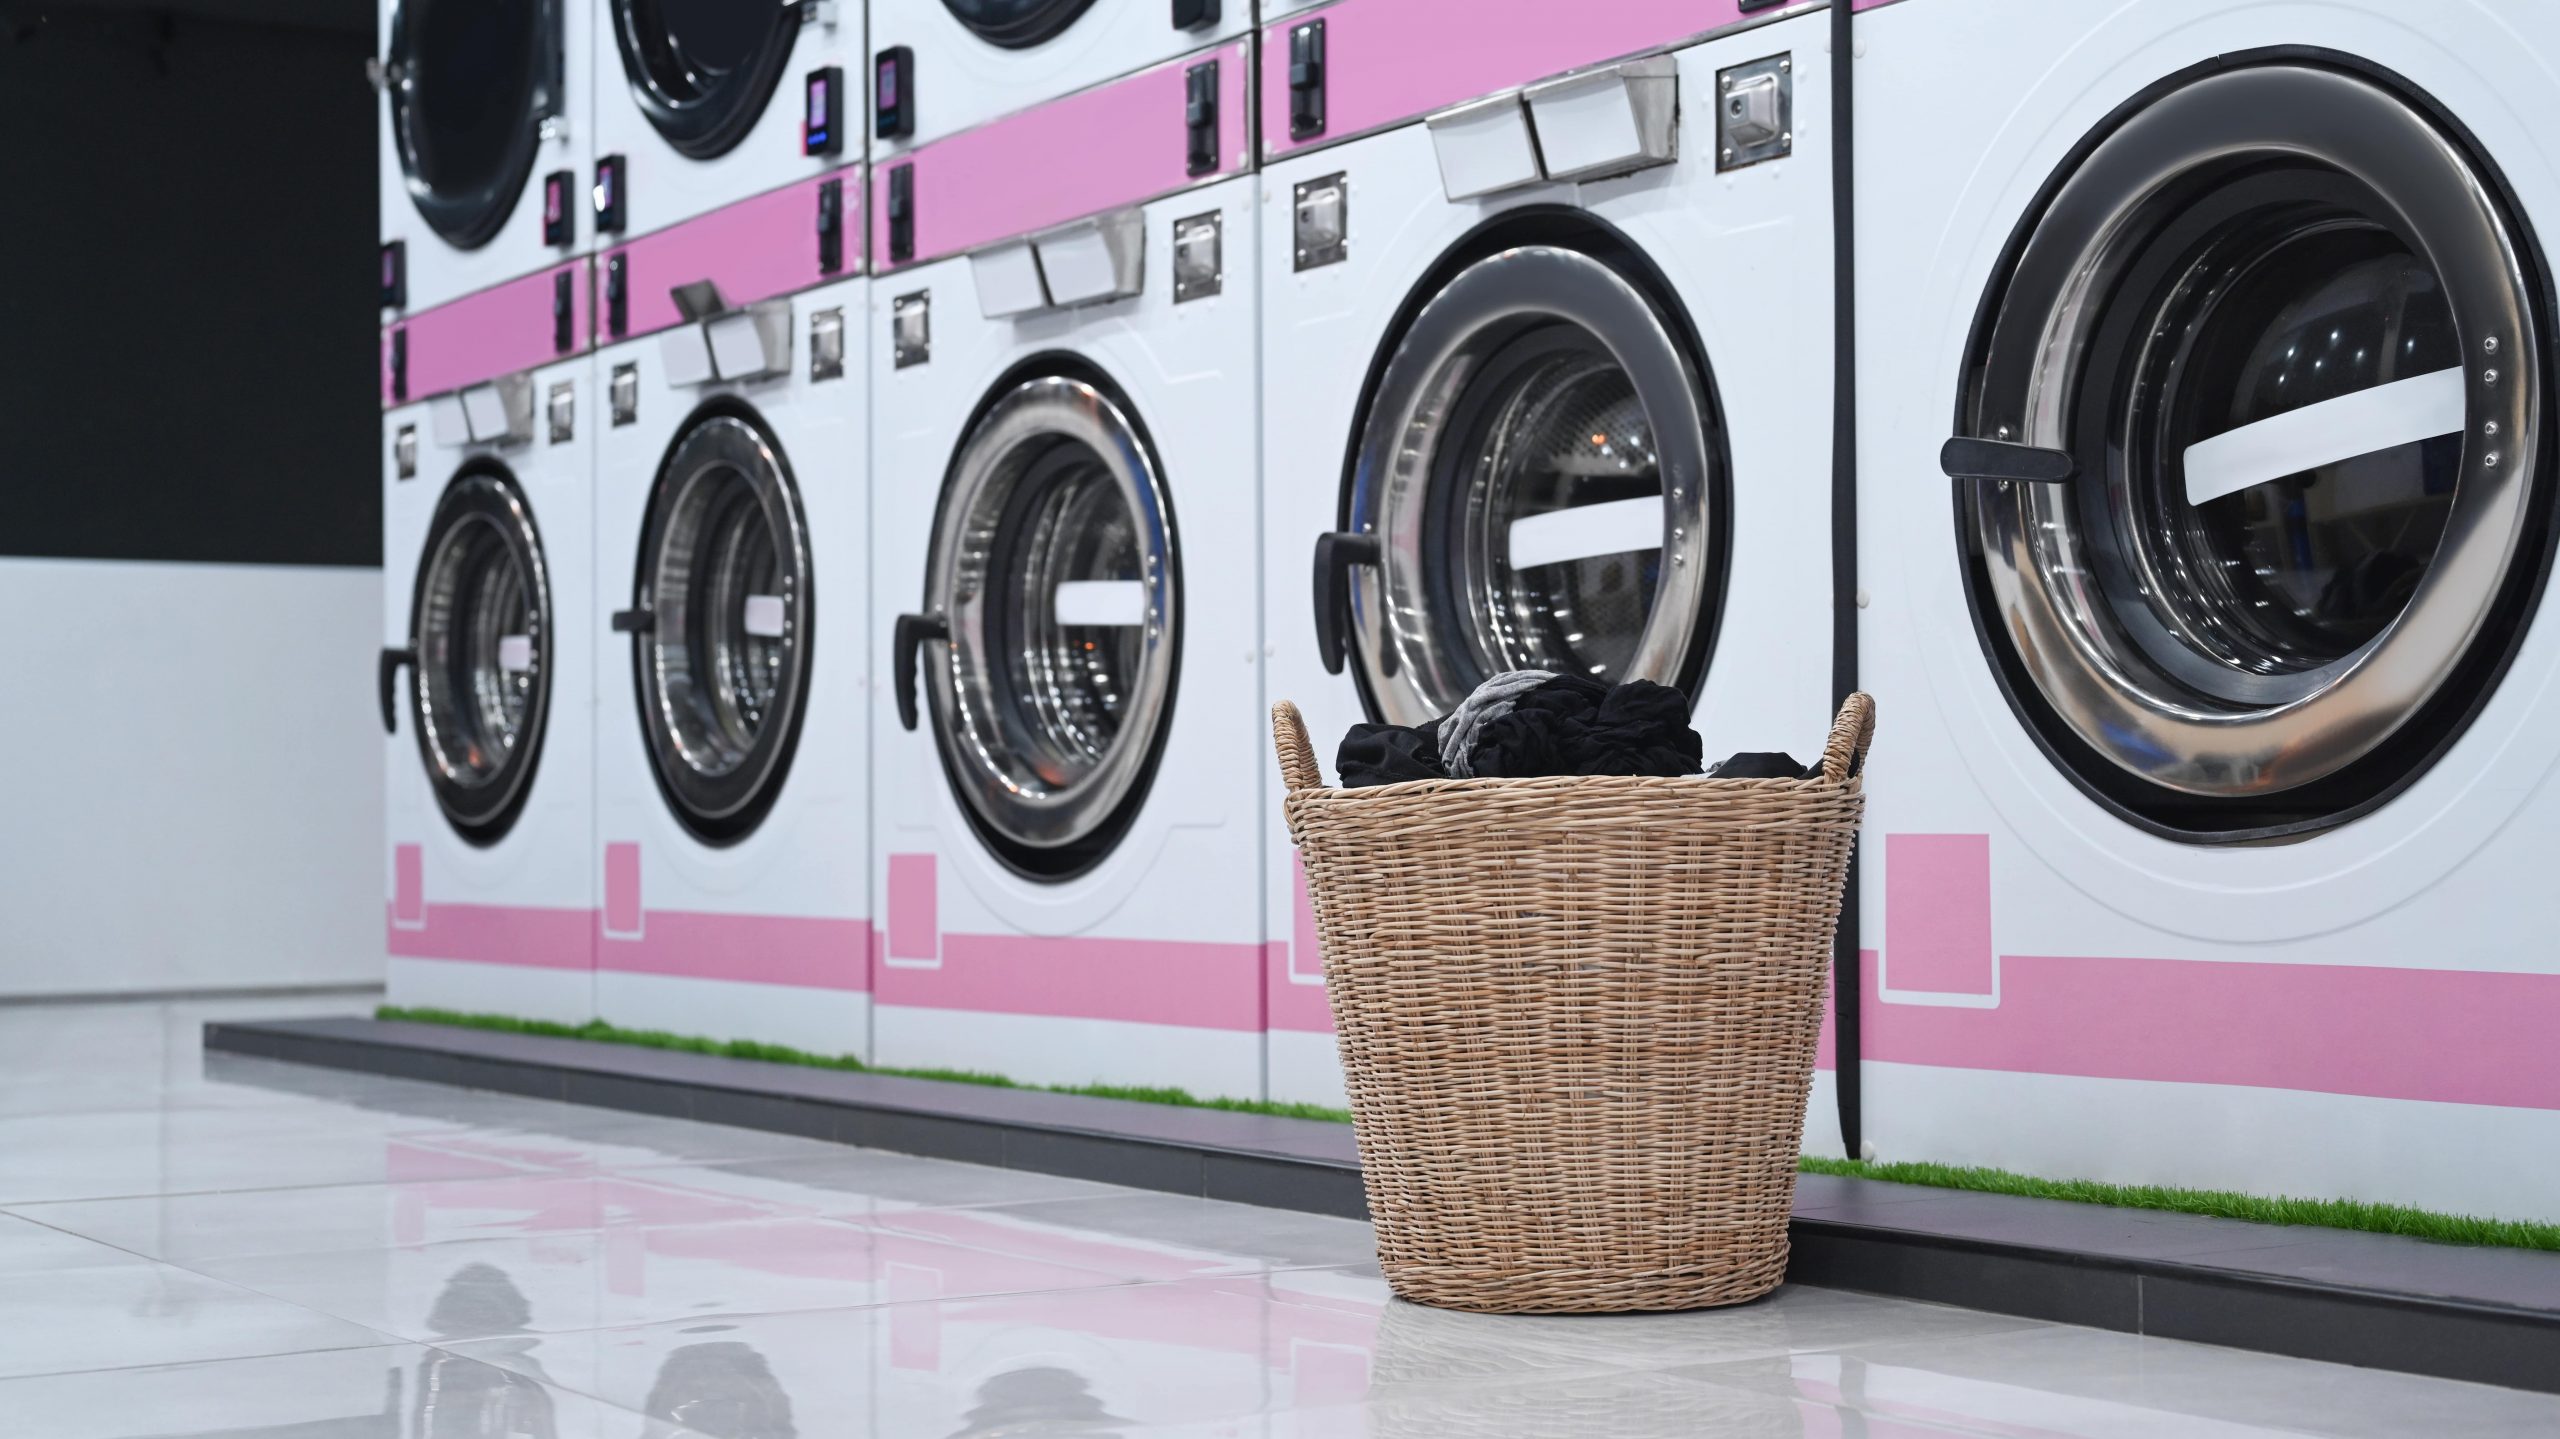 How to Start a Laundry Shop Business